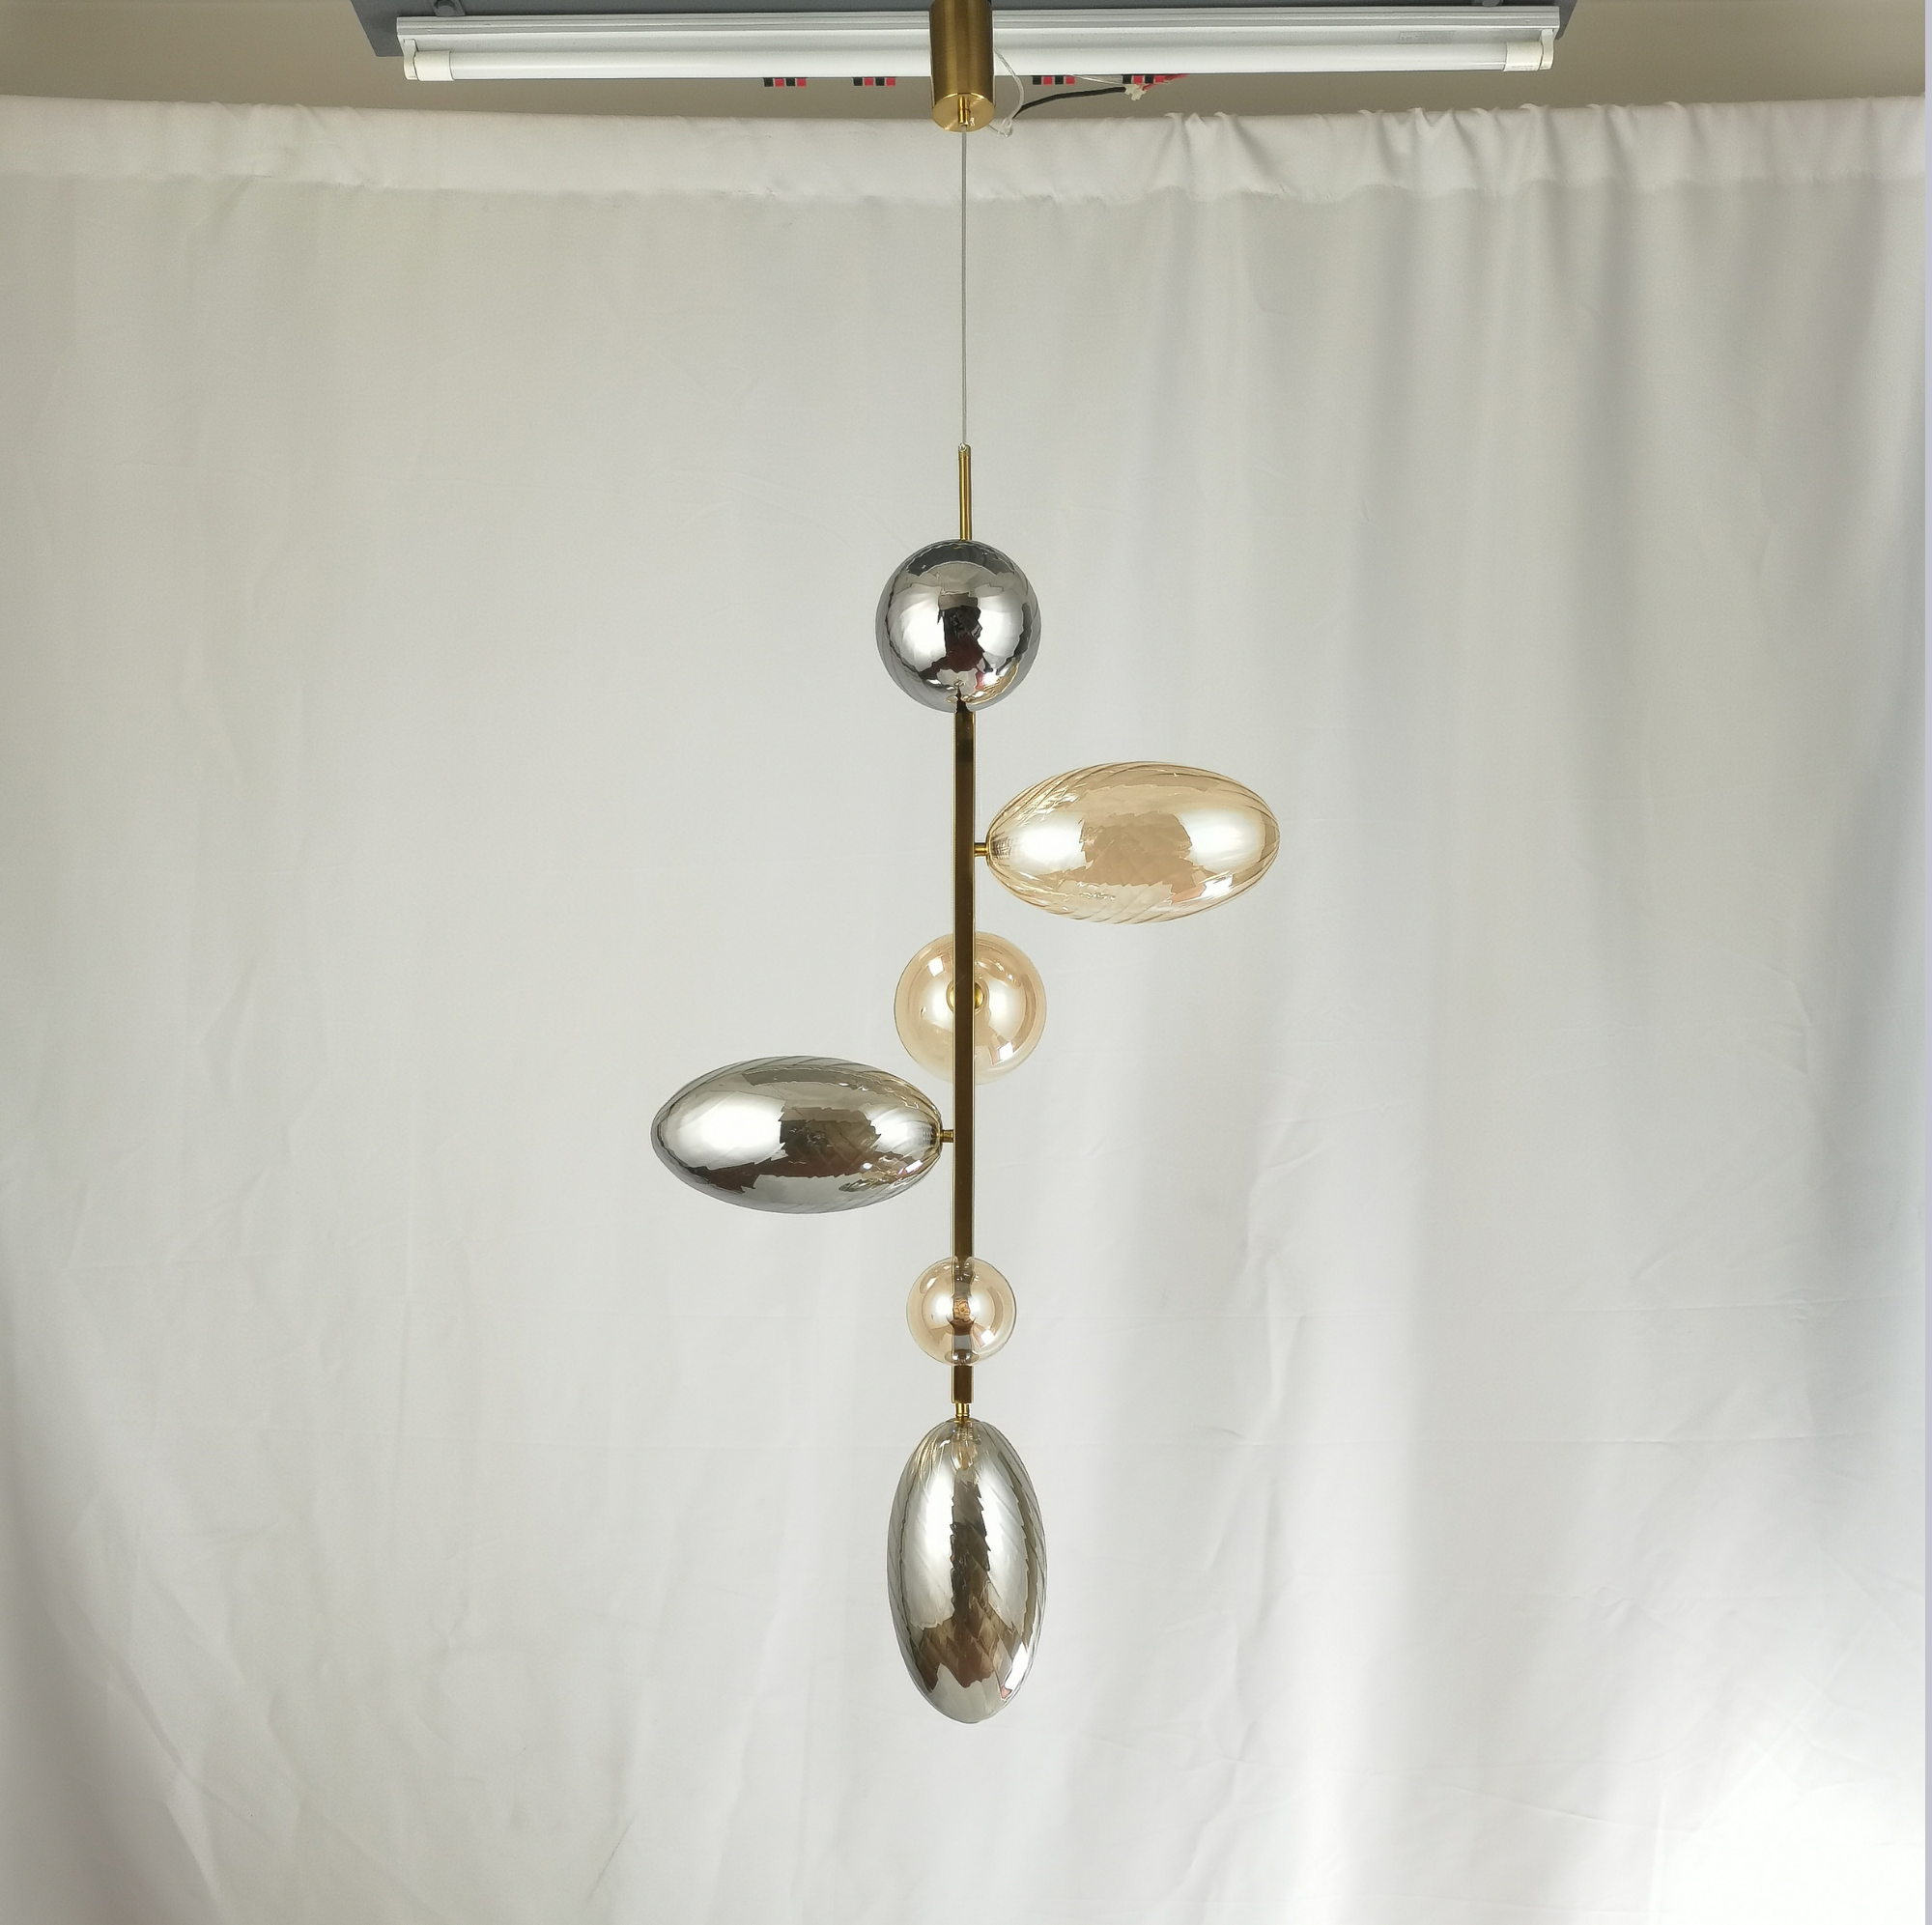 A1920 Modern Gold Glass LED Pendent Lamp